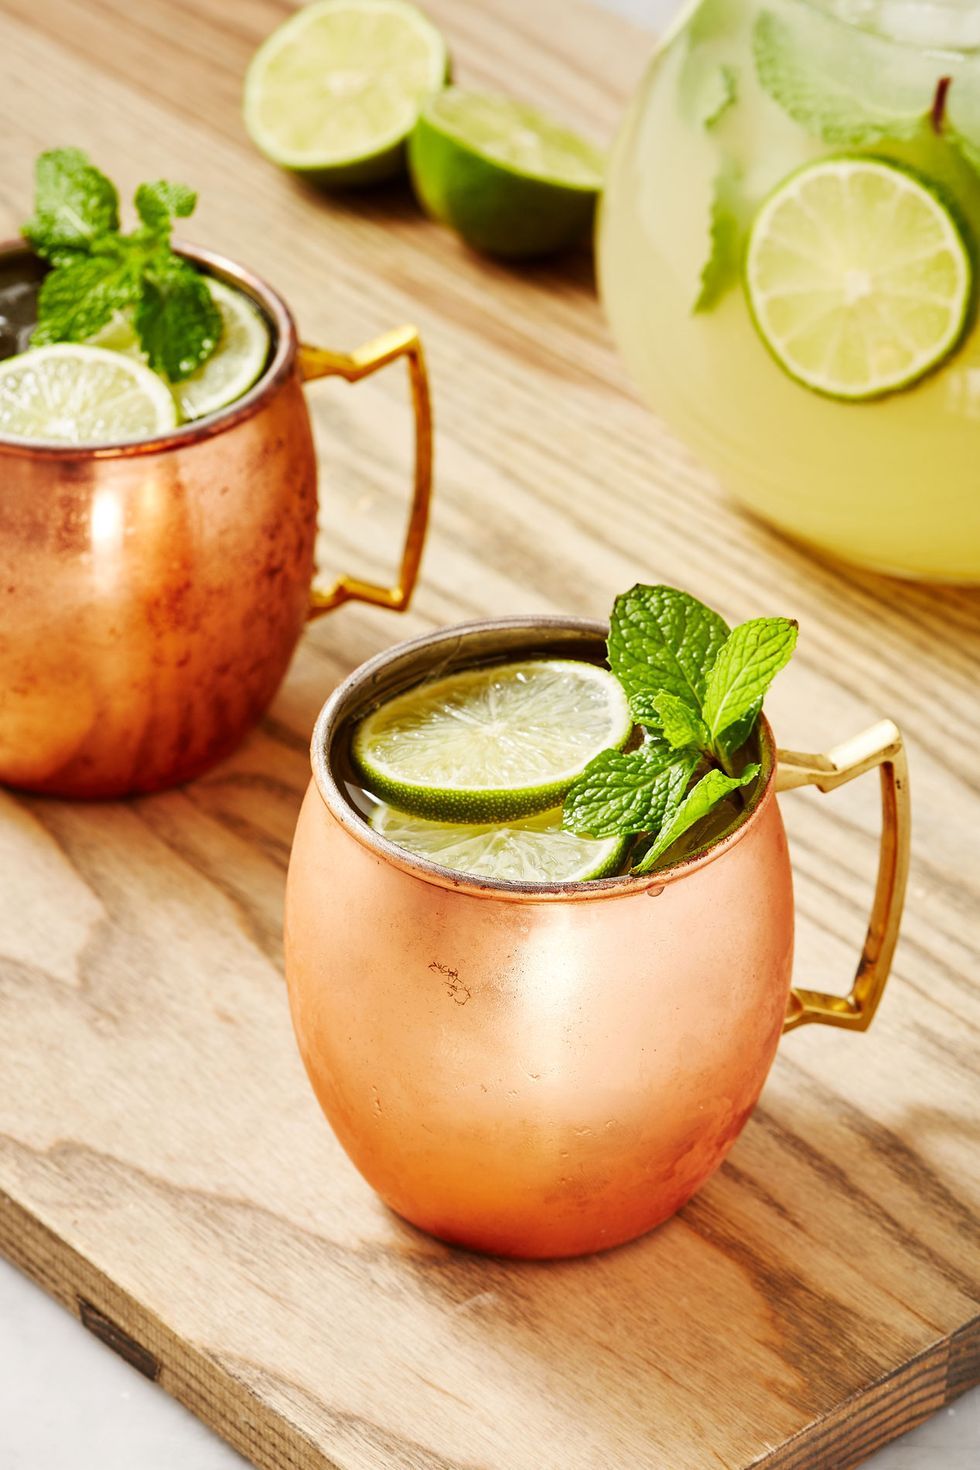 https://hips.hearstapps.com/hmg-prod/images/delish-191018-moscow-mule-punch-0124-portrait-pf-1660870391.jpg?crop=1xw:1xh;center,top&resize=980:*